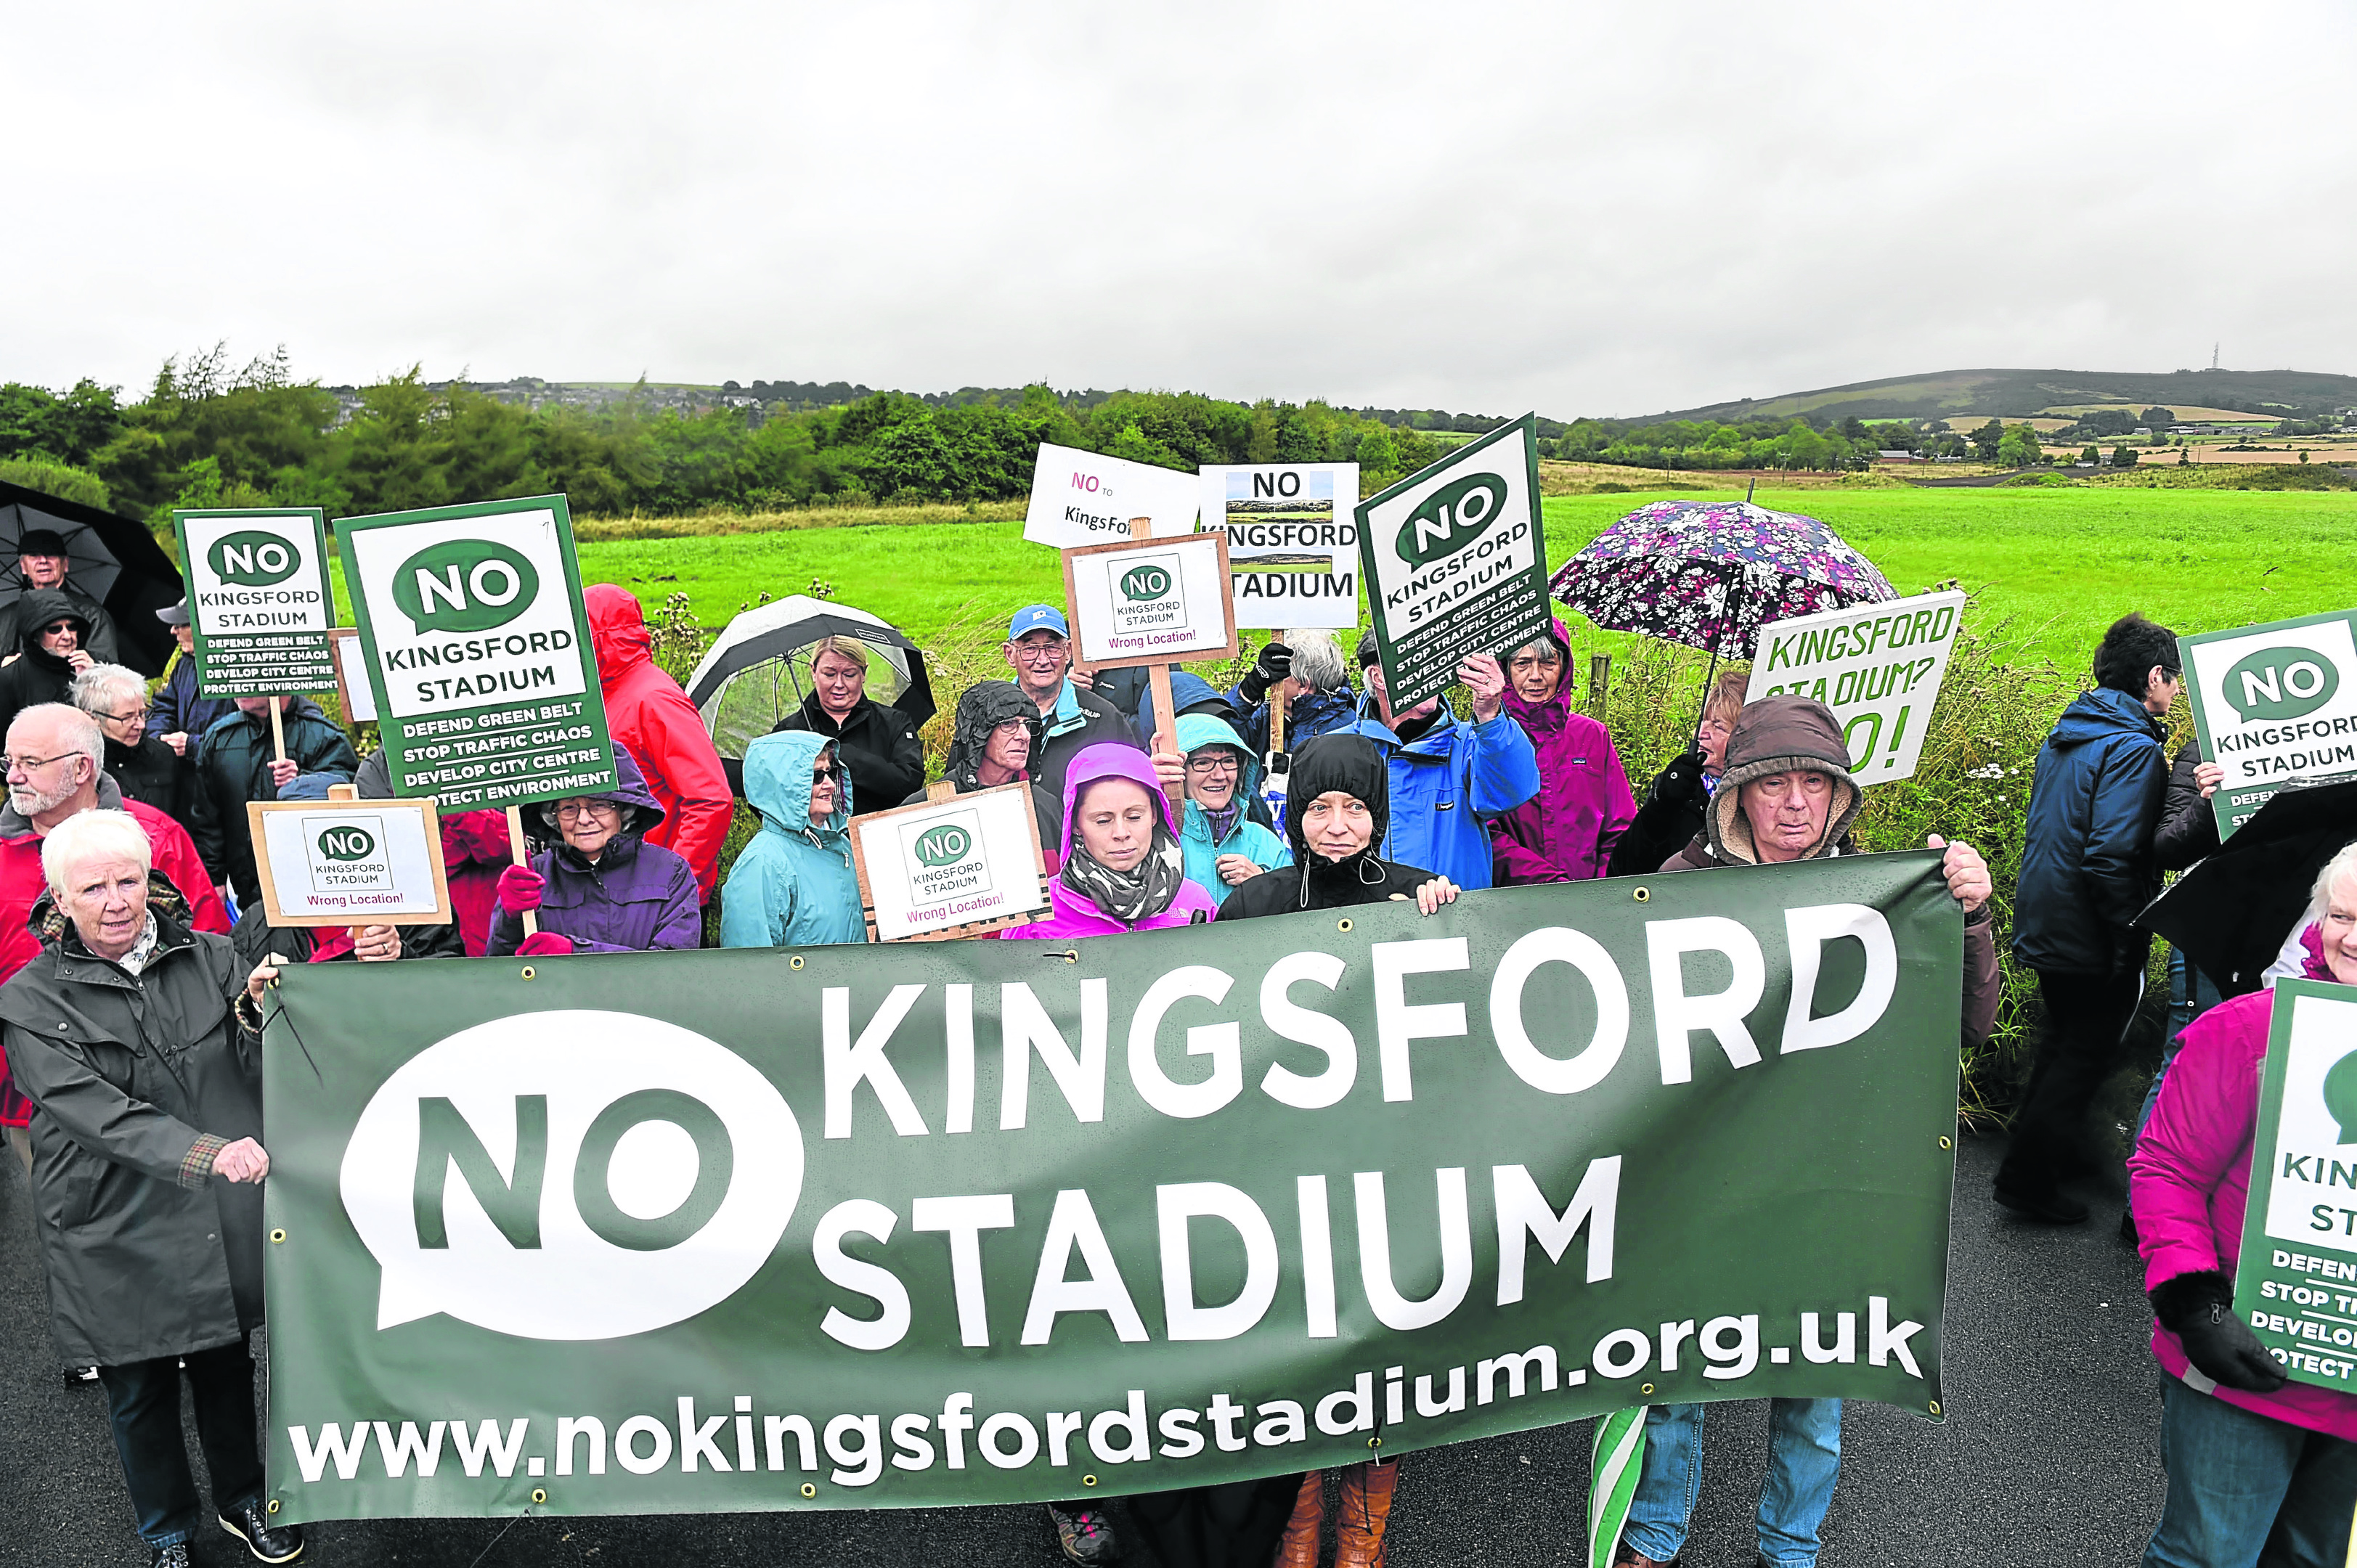 The No Kingsford Stadium protest group